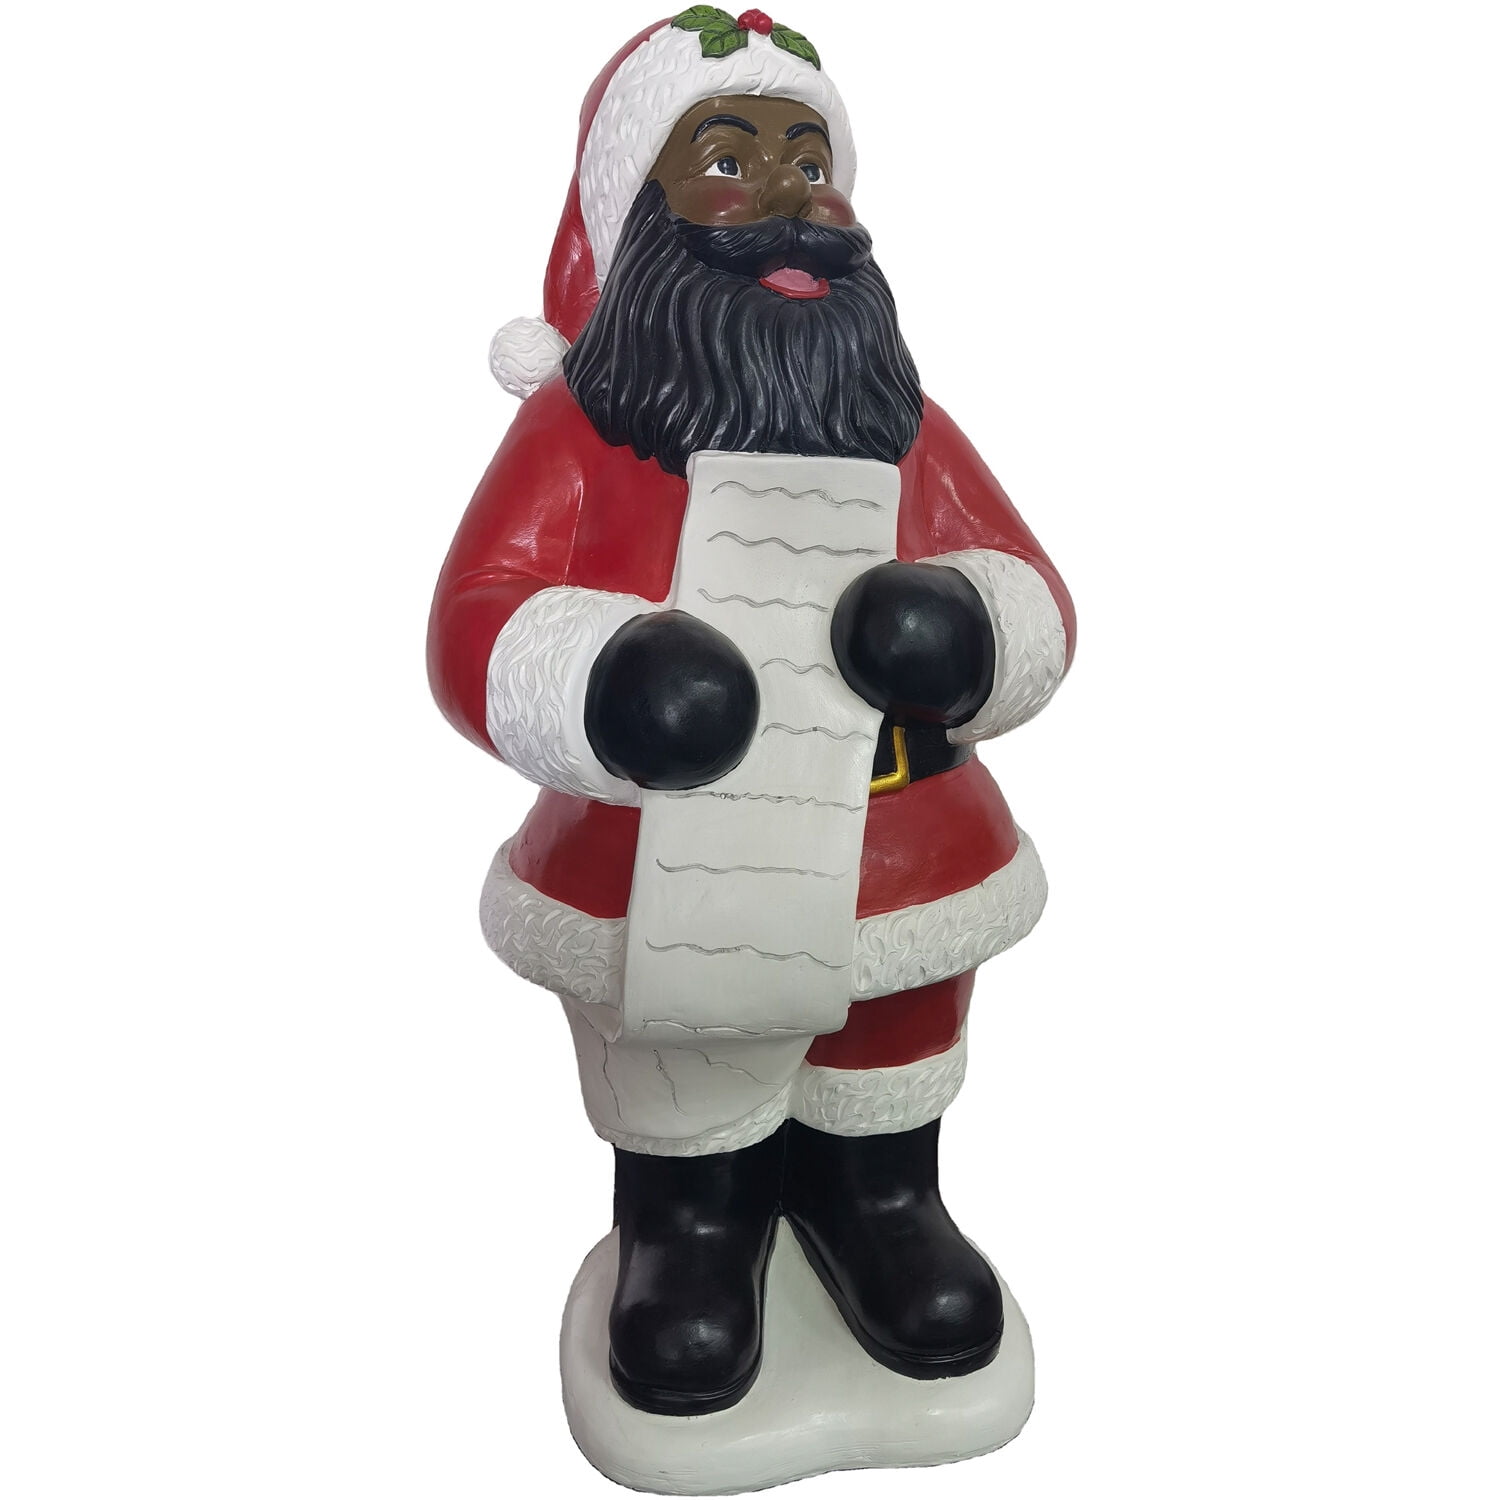 16" African American Handcrafted Santa Claus Figurine Holiday Christmas Decor 